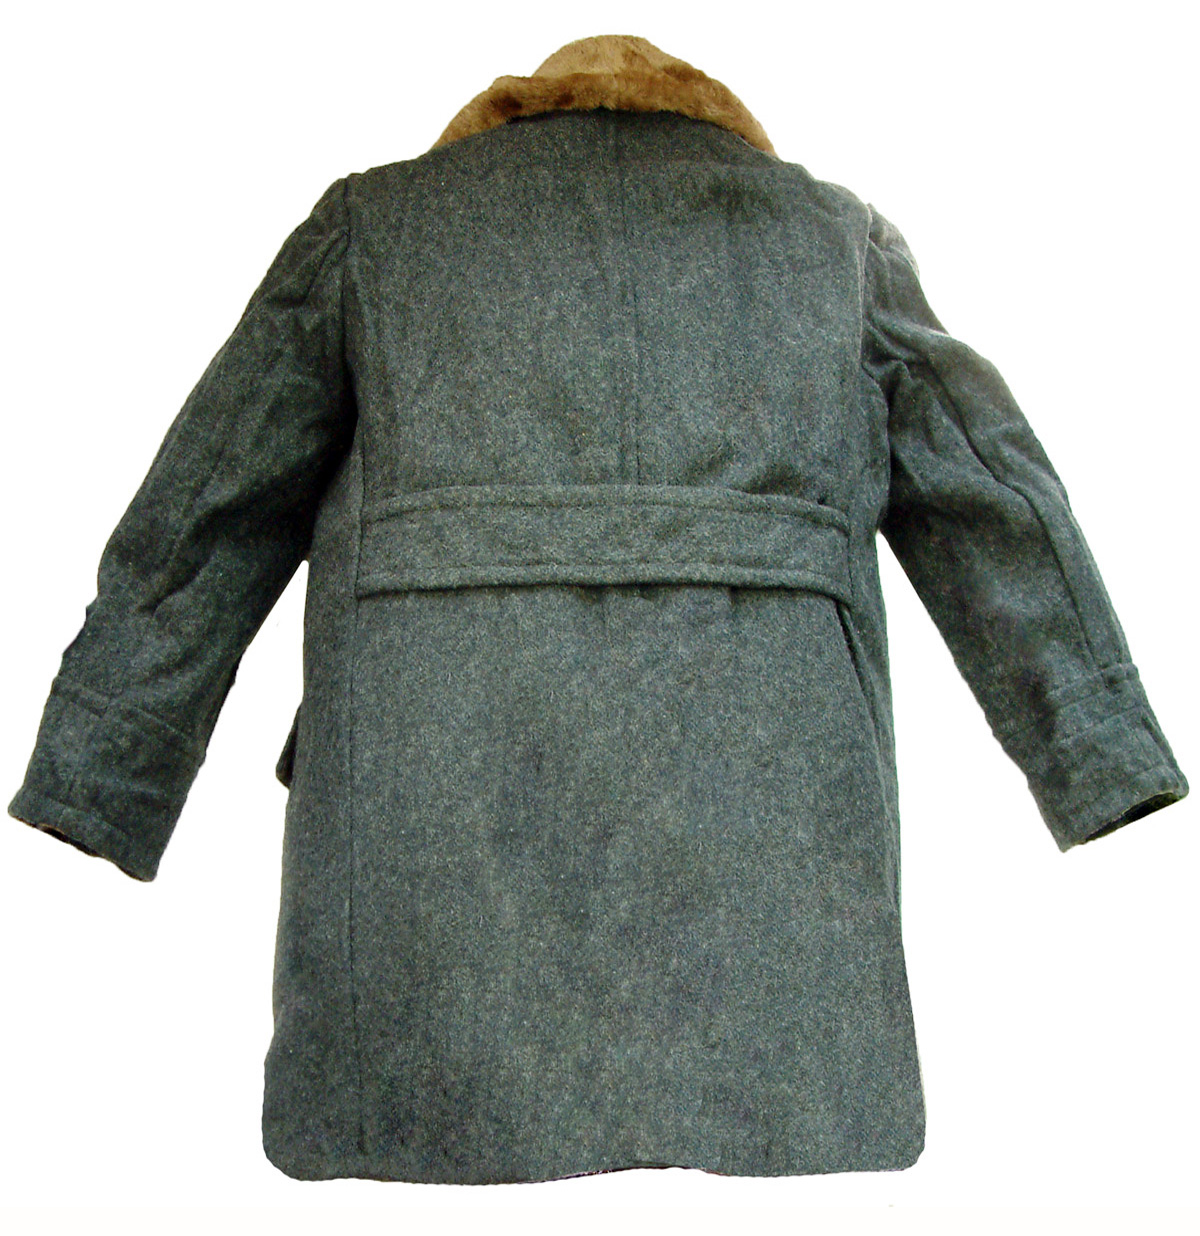 Soviet Issue Sheepskin Lined Great Coat by Russian Army